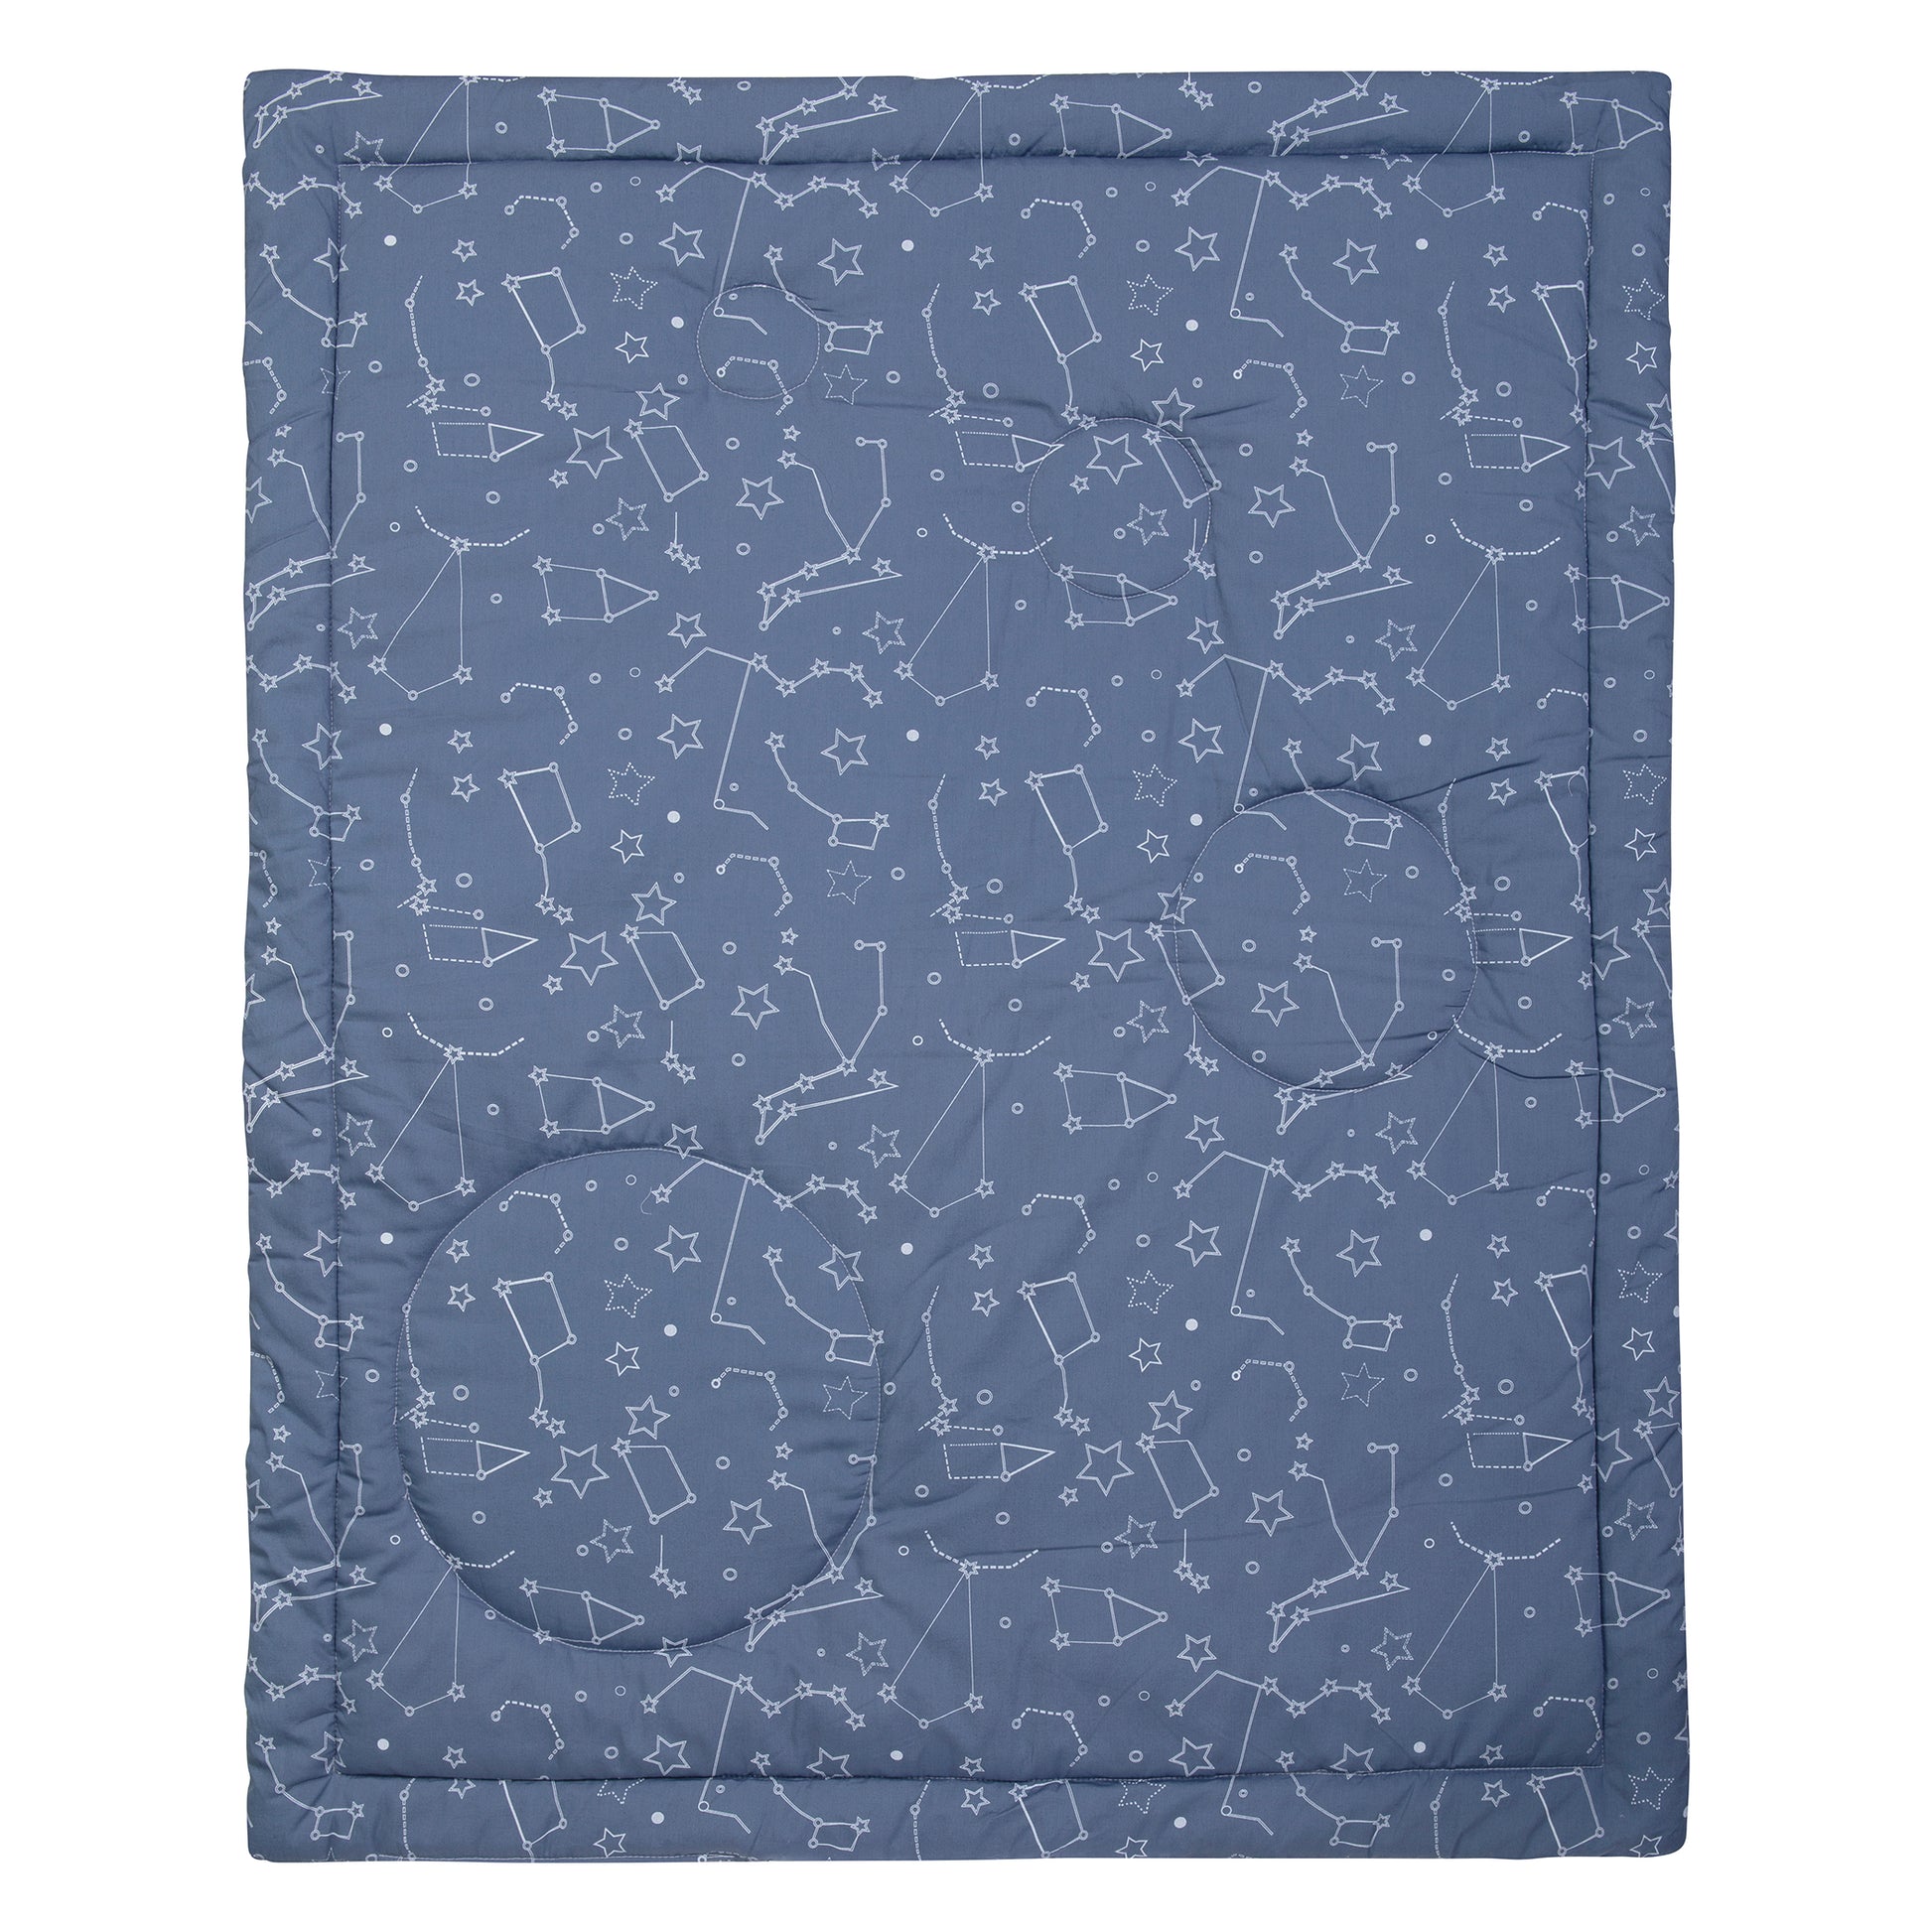 Reversible 100% cotton quilt measures 35 in x 45 in and features rocket ships scatter print with planet appliques bordered by solid and star constellations in navy blue, gray, white with pops of yellow. Quilt is backed in star constellations in navy blue 